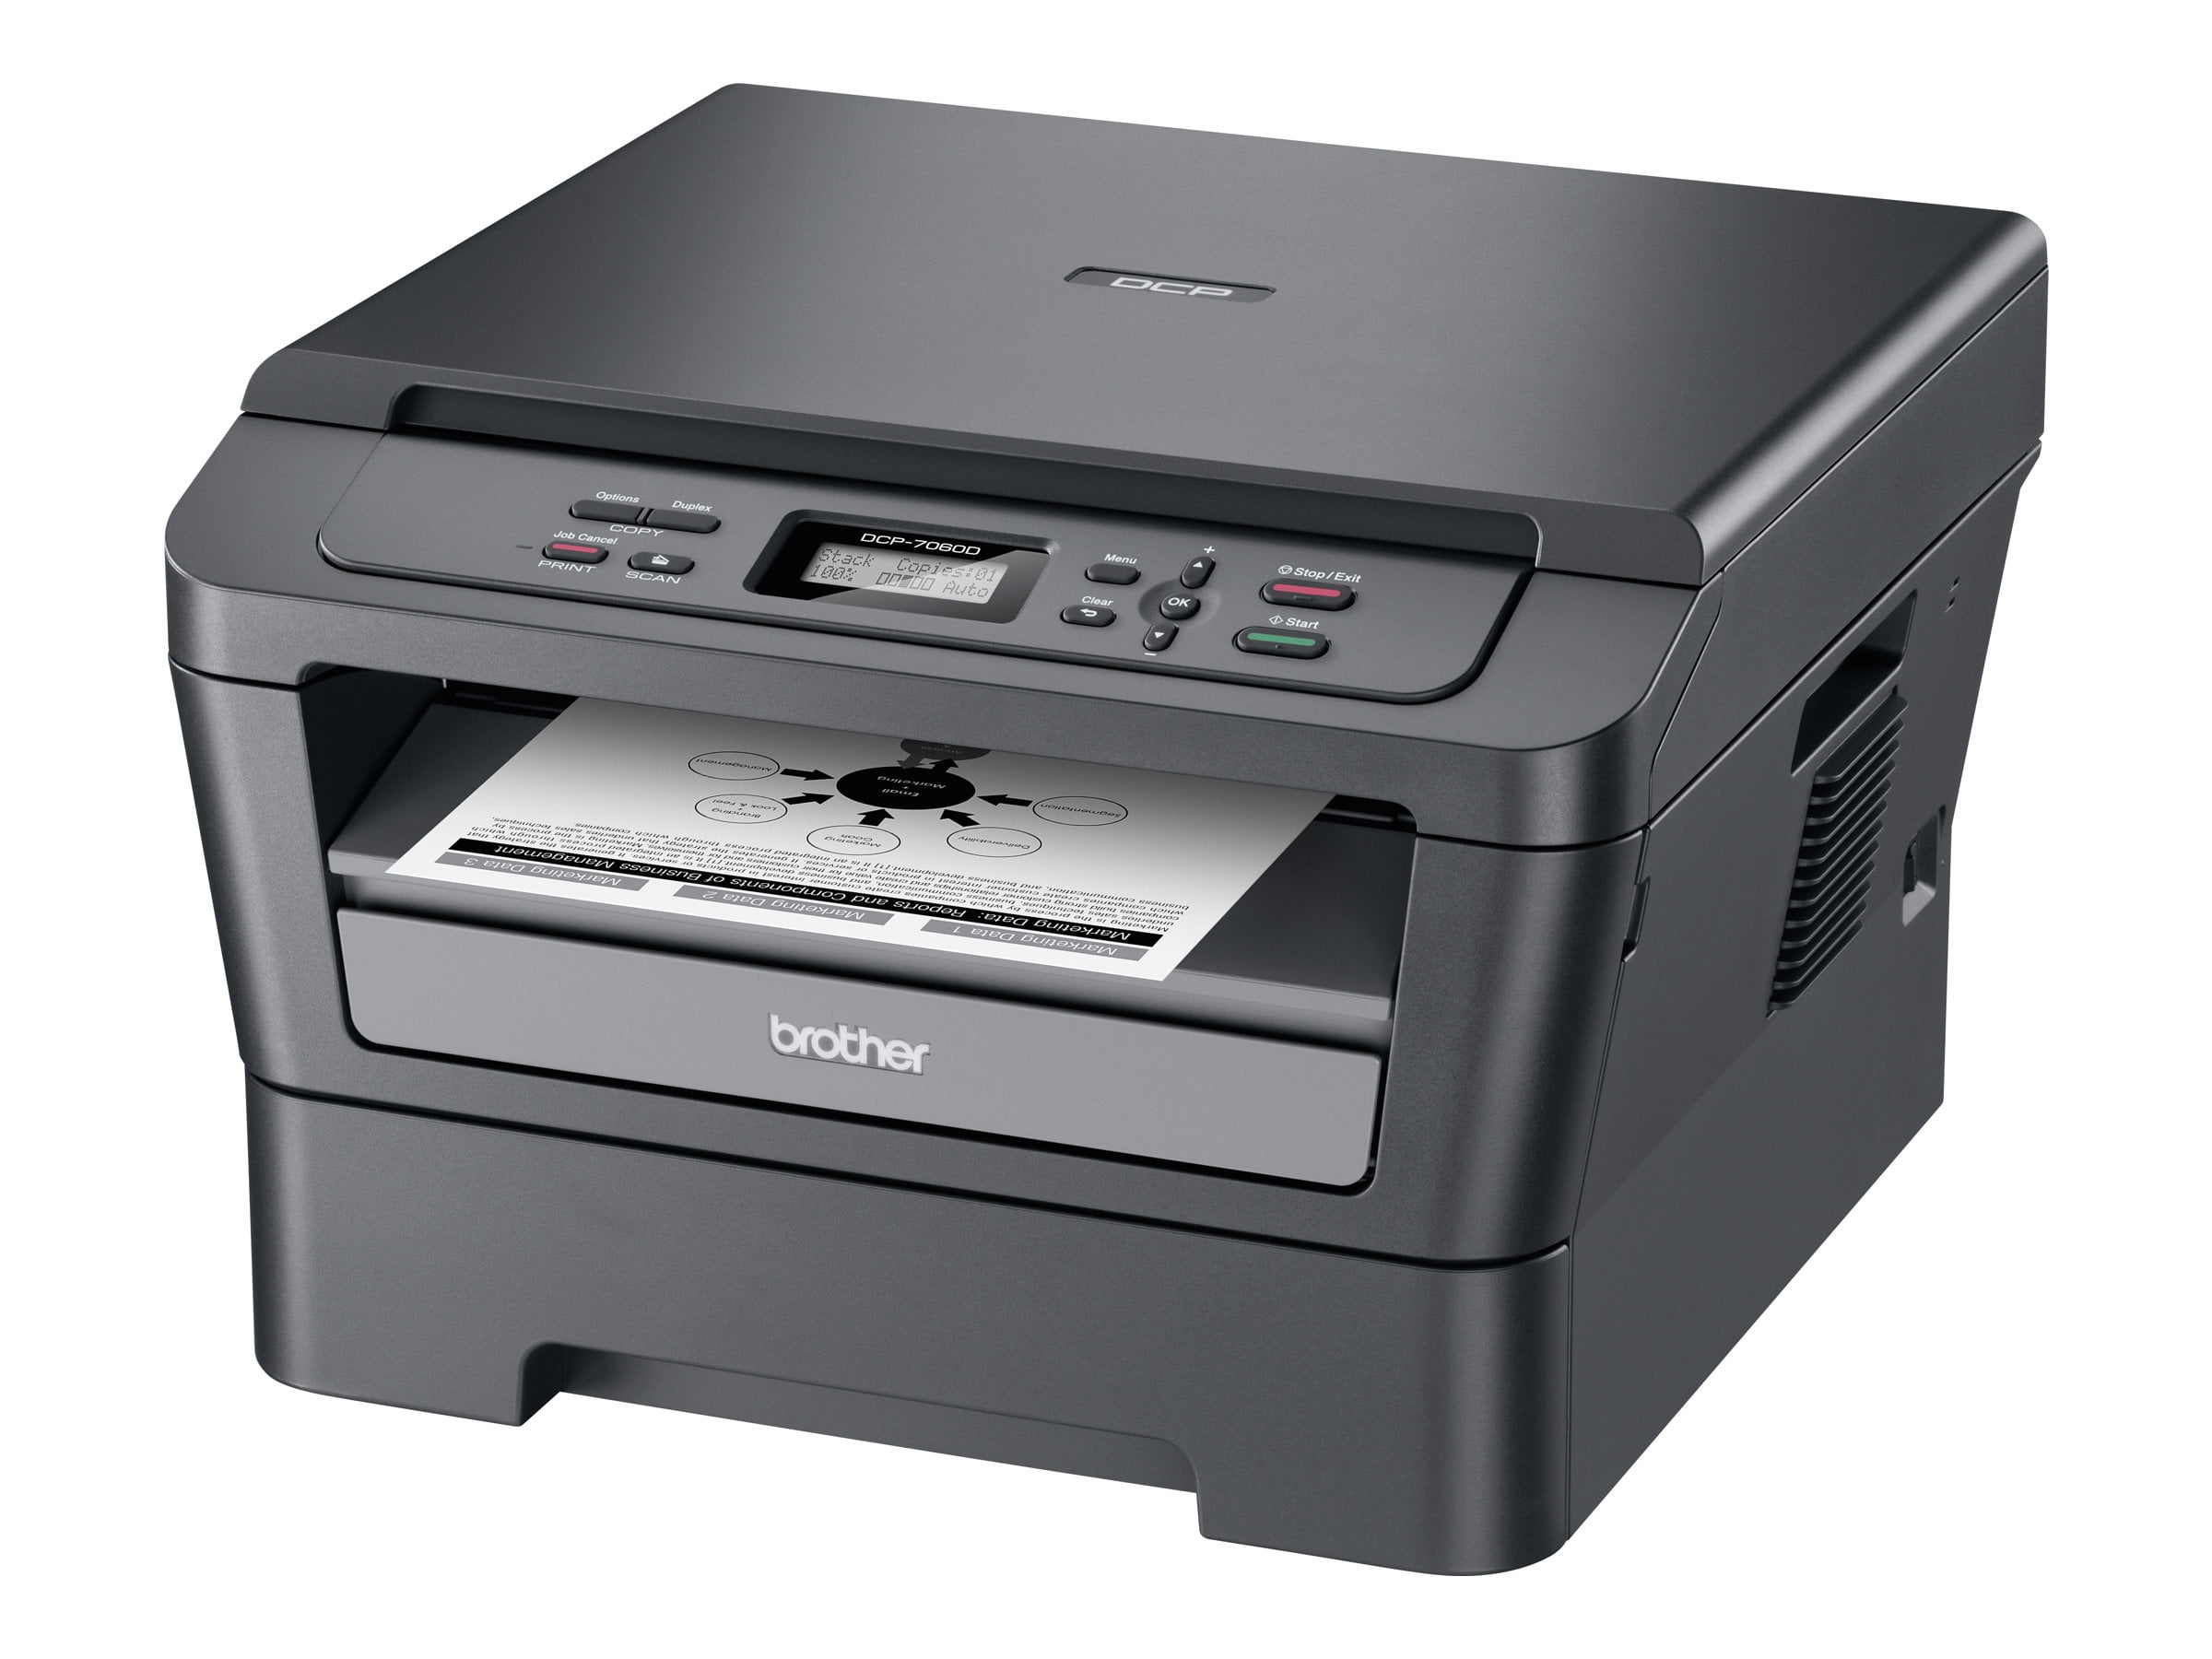 Brother DCP-7060D - Multifunction printer - B/W - laser - 8.5 in x 11.7 in (original) - A4 (media) - up to 24 ppm (copying) - up to ppm (printing) 250 sheets - USB 2.0 - Walmart.com